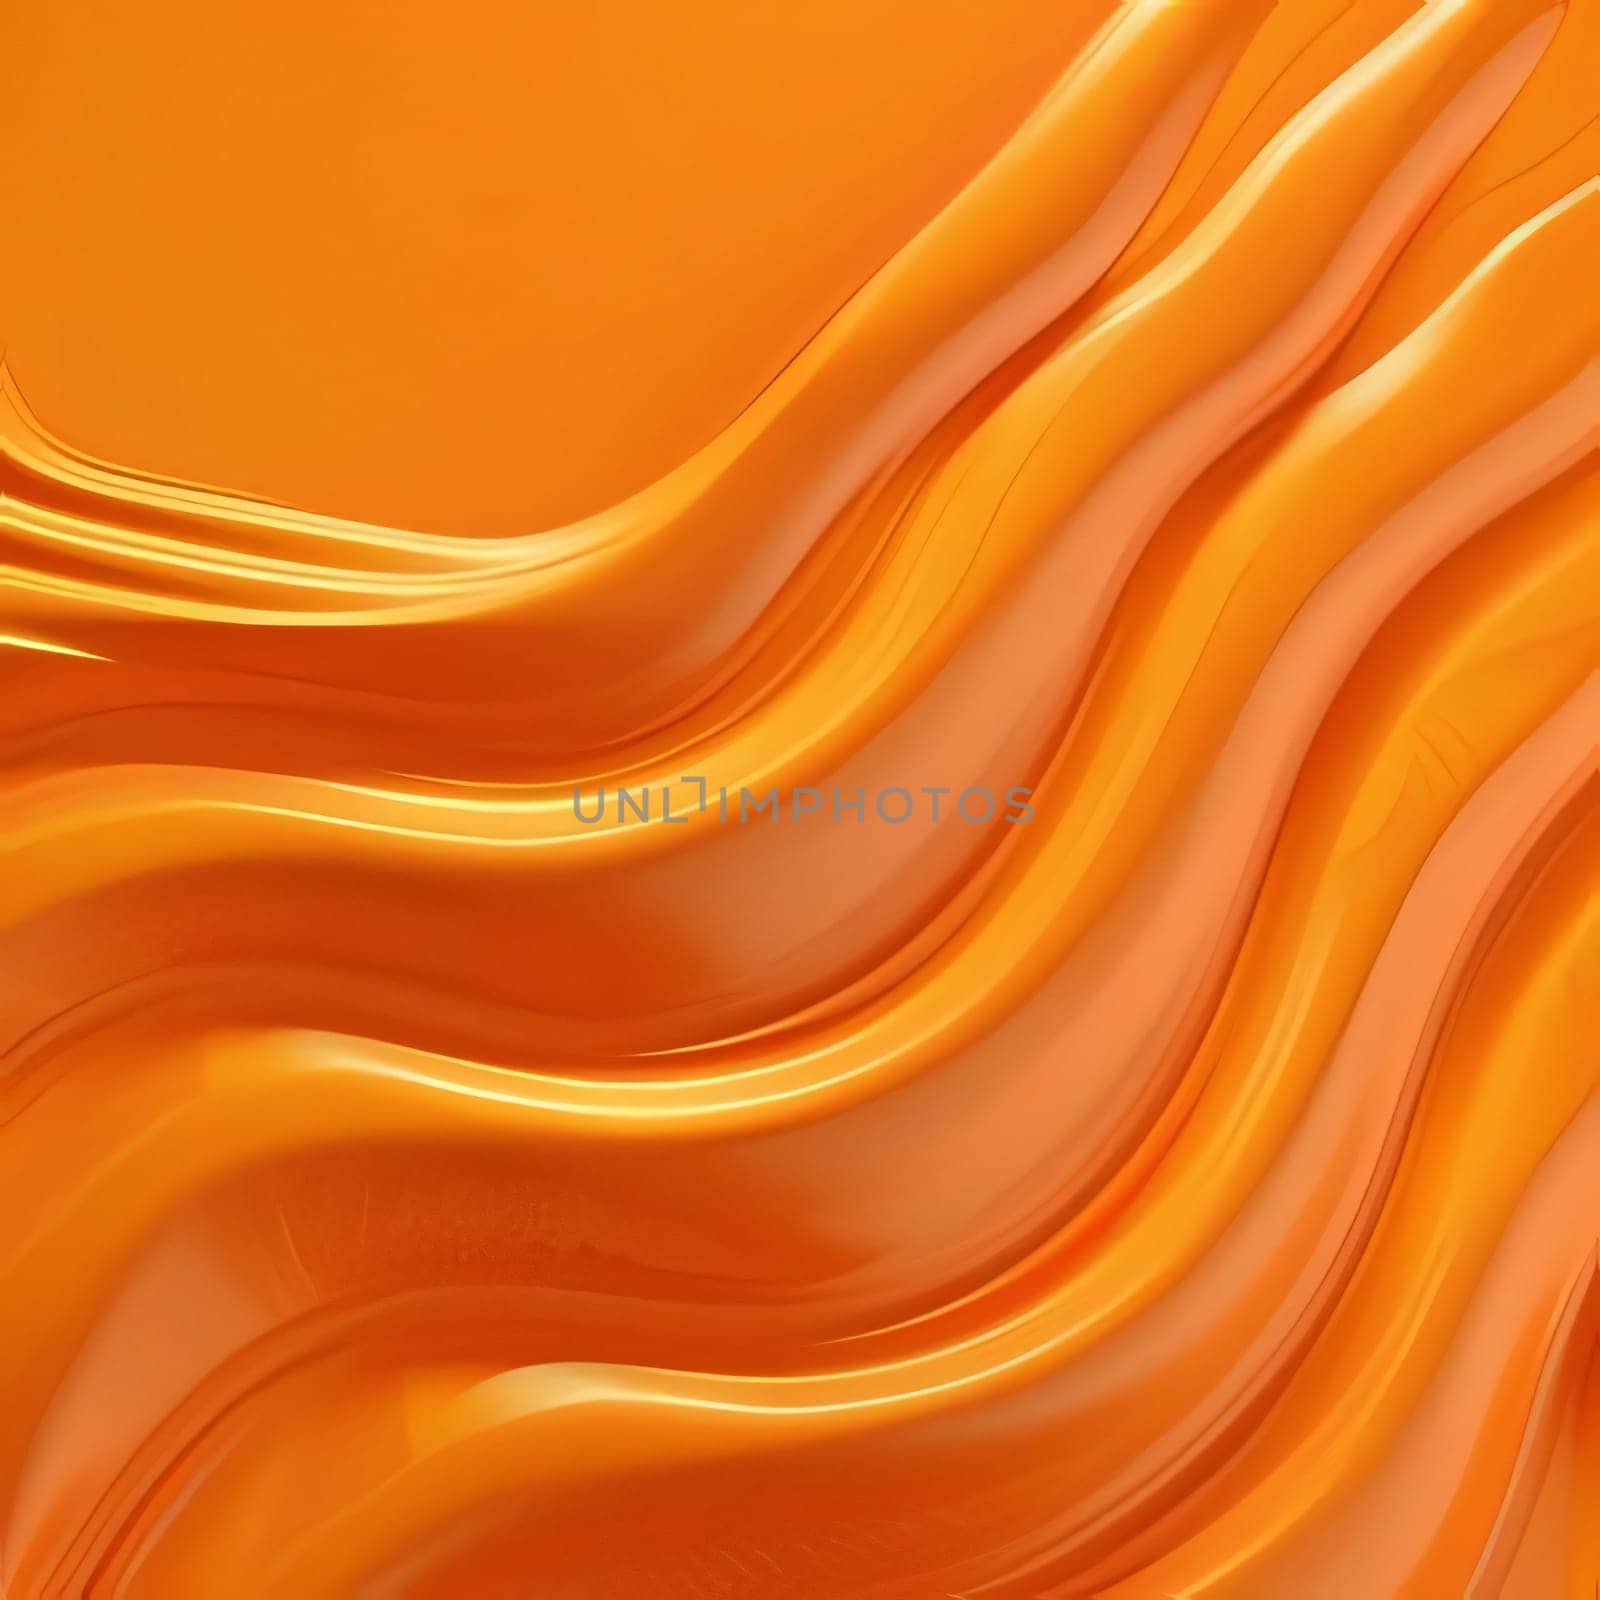 Abstract background design: abstract orange background with smooth wavy lines. 3d render illustration